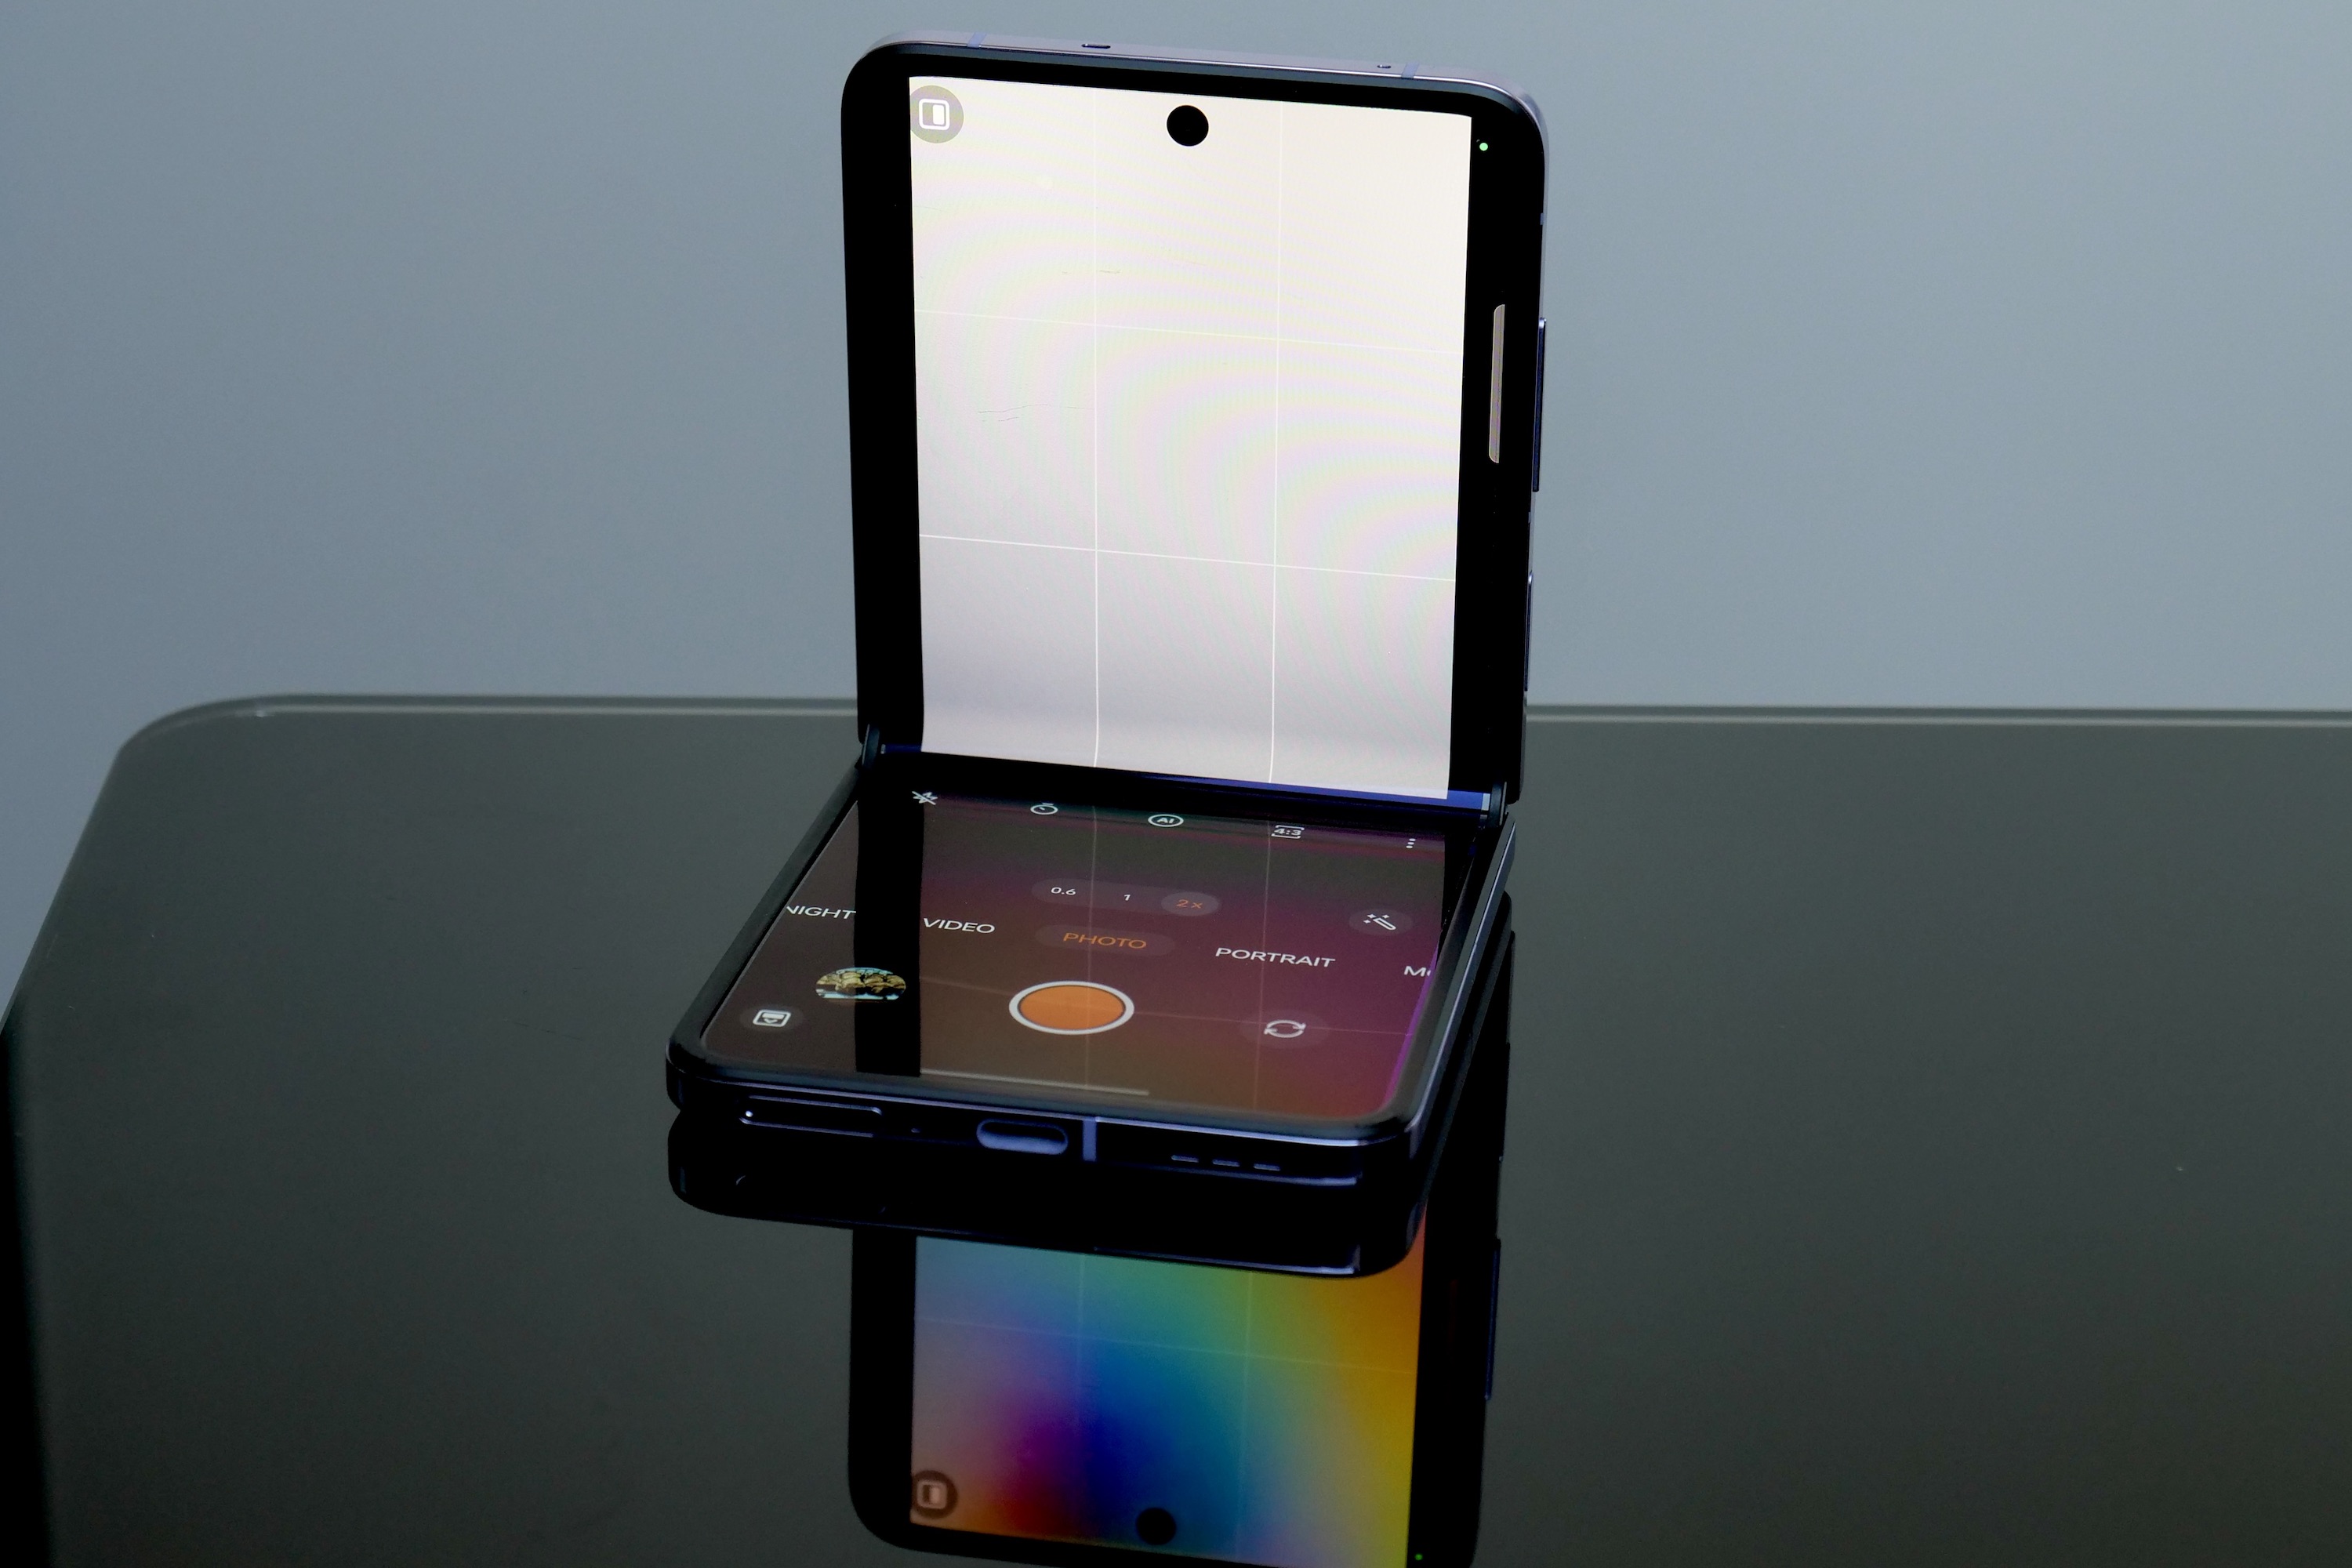 Galaxy Z Flip 3: new renders show the foldable phone with an updated rear  camera hump and secondary screen -  News